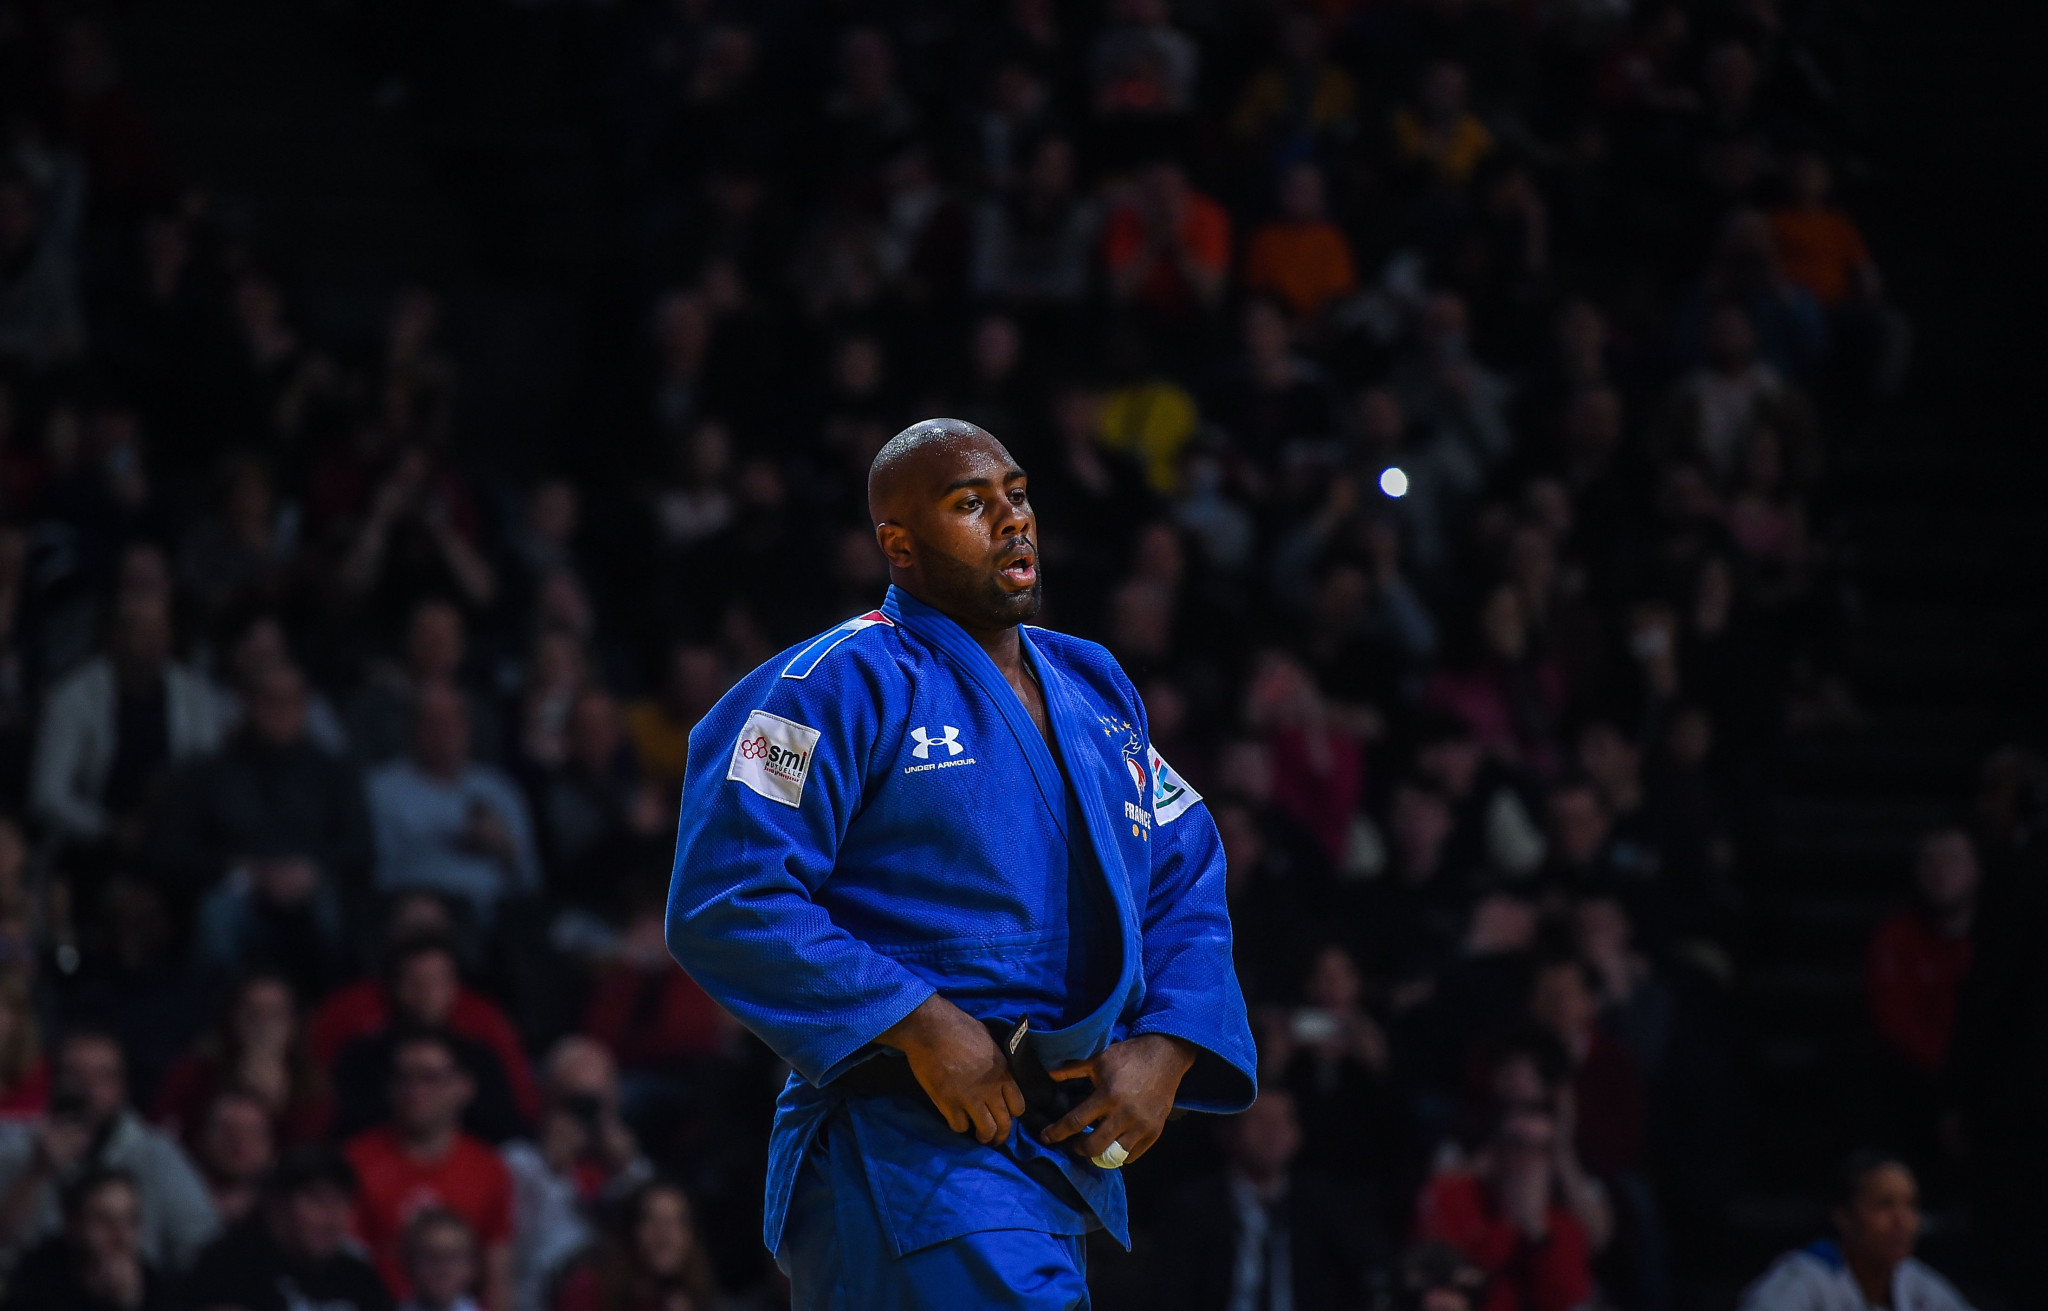 Teddy Riner had been due to compete in Rabat ©Getty Images